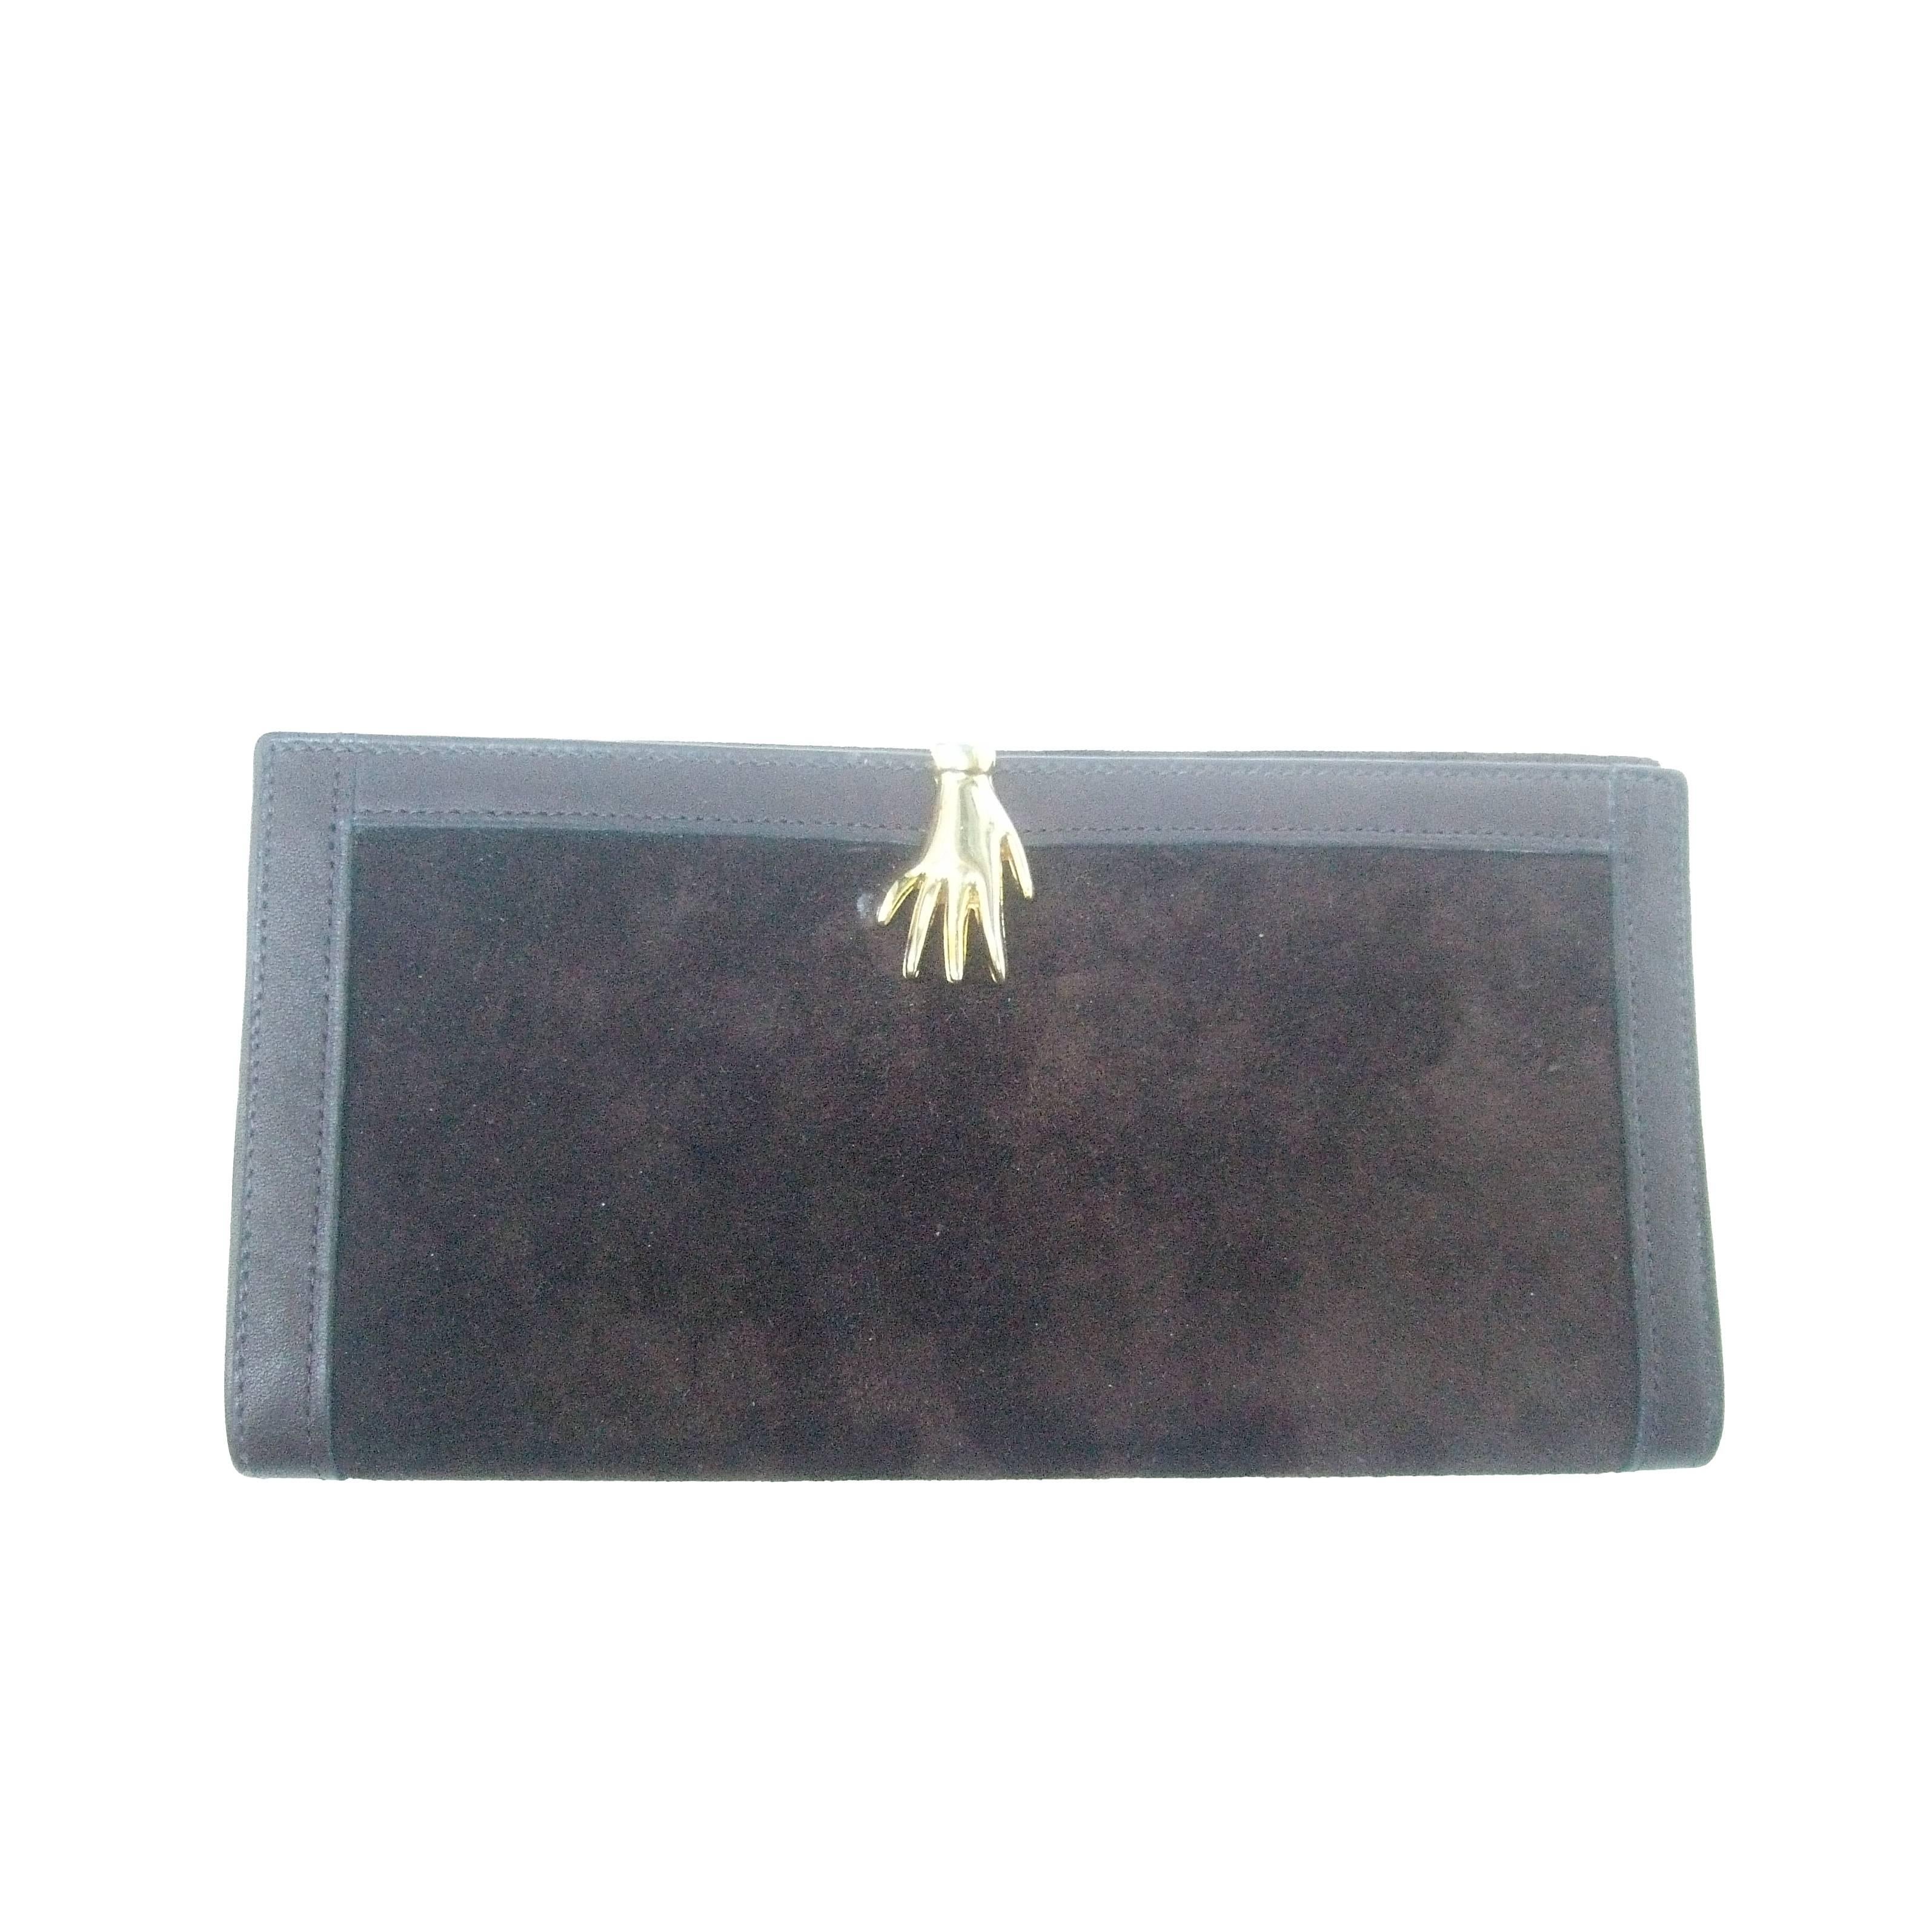 Gucci Italy Rare chocolate brown suede hand clasp wallet 
The stylish Italian wallet is covered with plush brown 
suede on both exterior sides

The unique wallet is adorned with a gilt metal hand
clasp mechanism. The edges of the wallet are